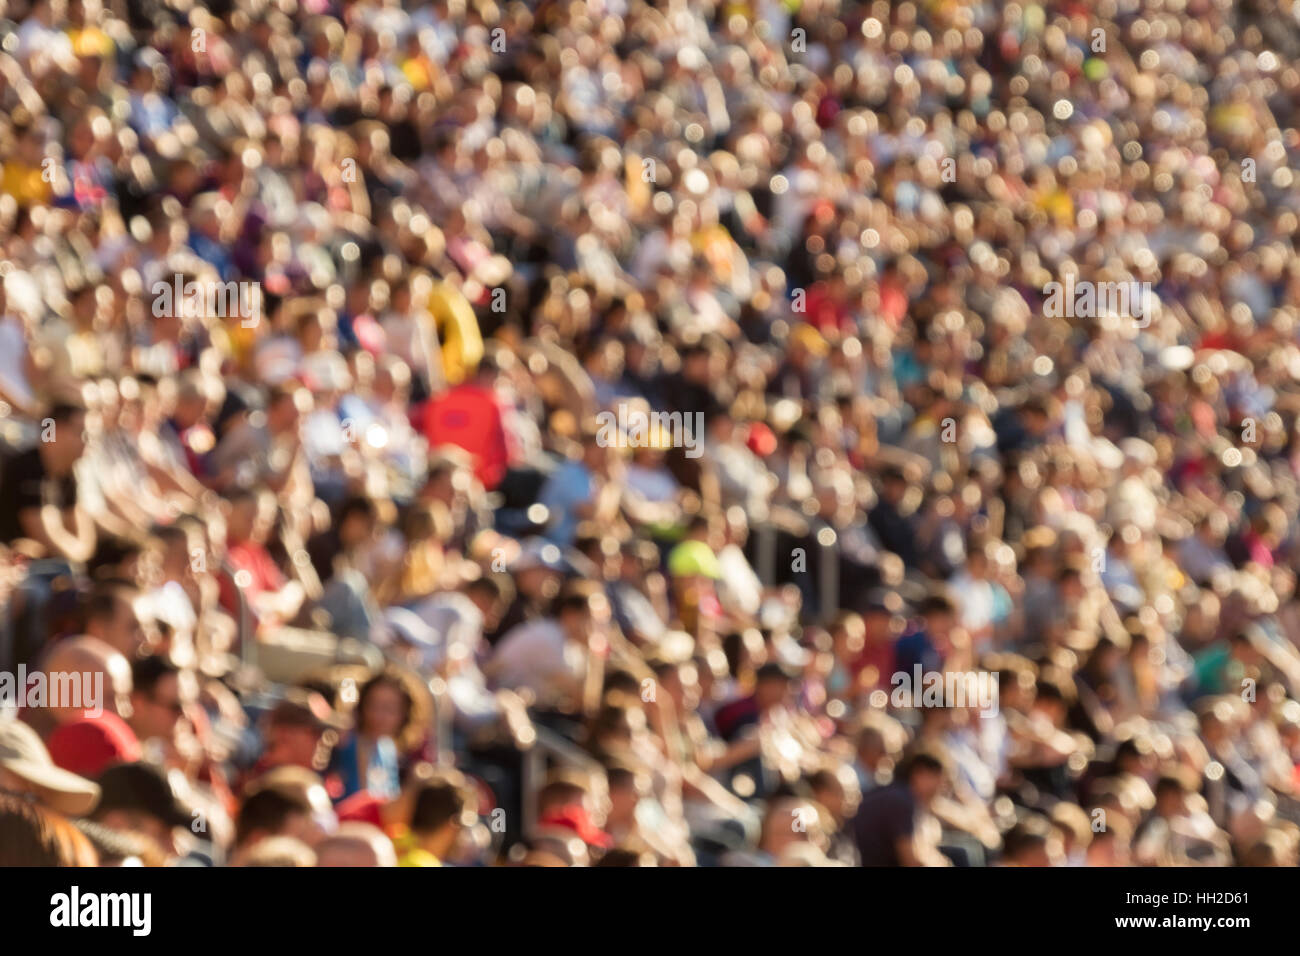 Blurred out people attending an event at an outdoor stadium Stock Photo